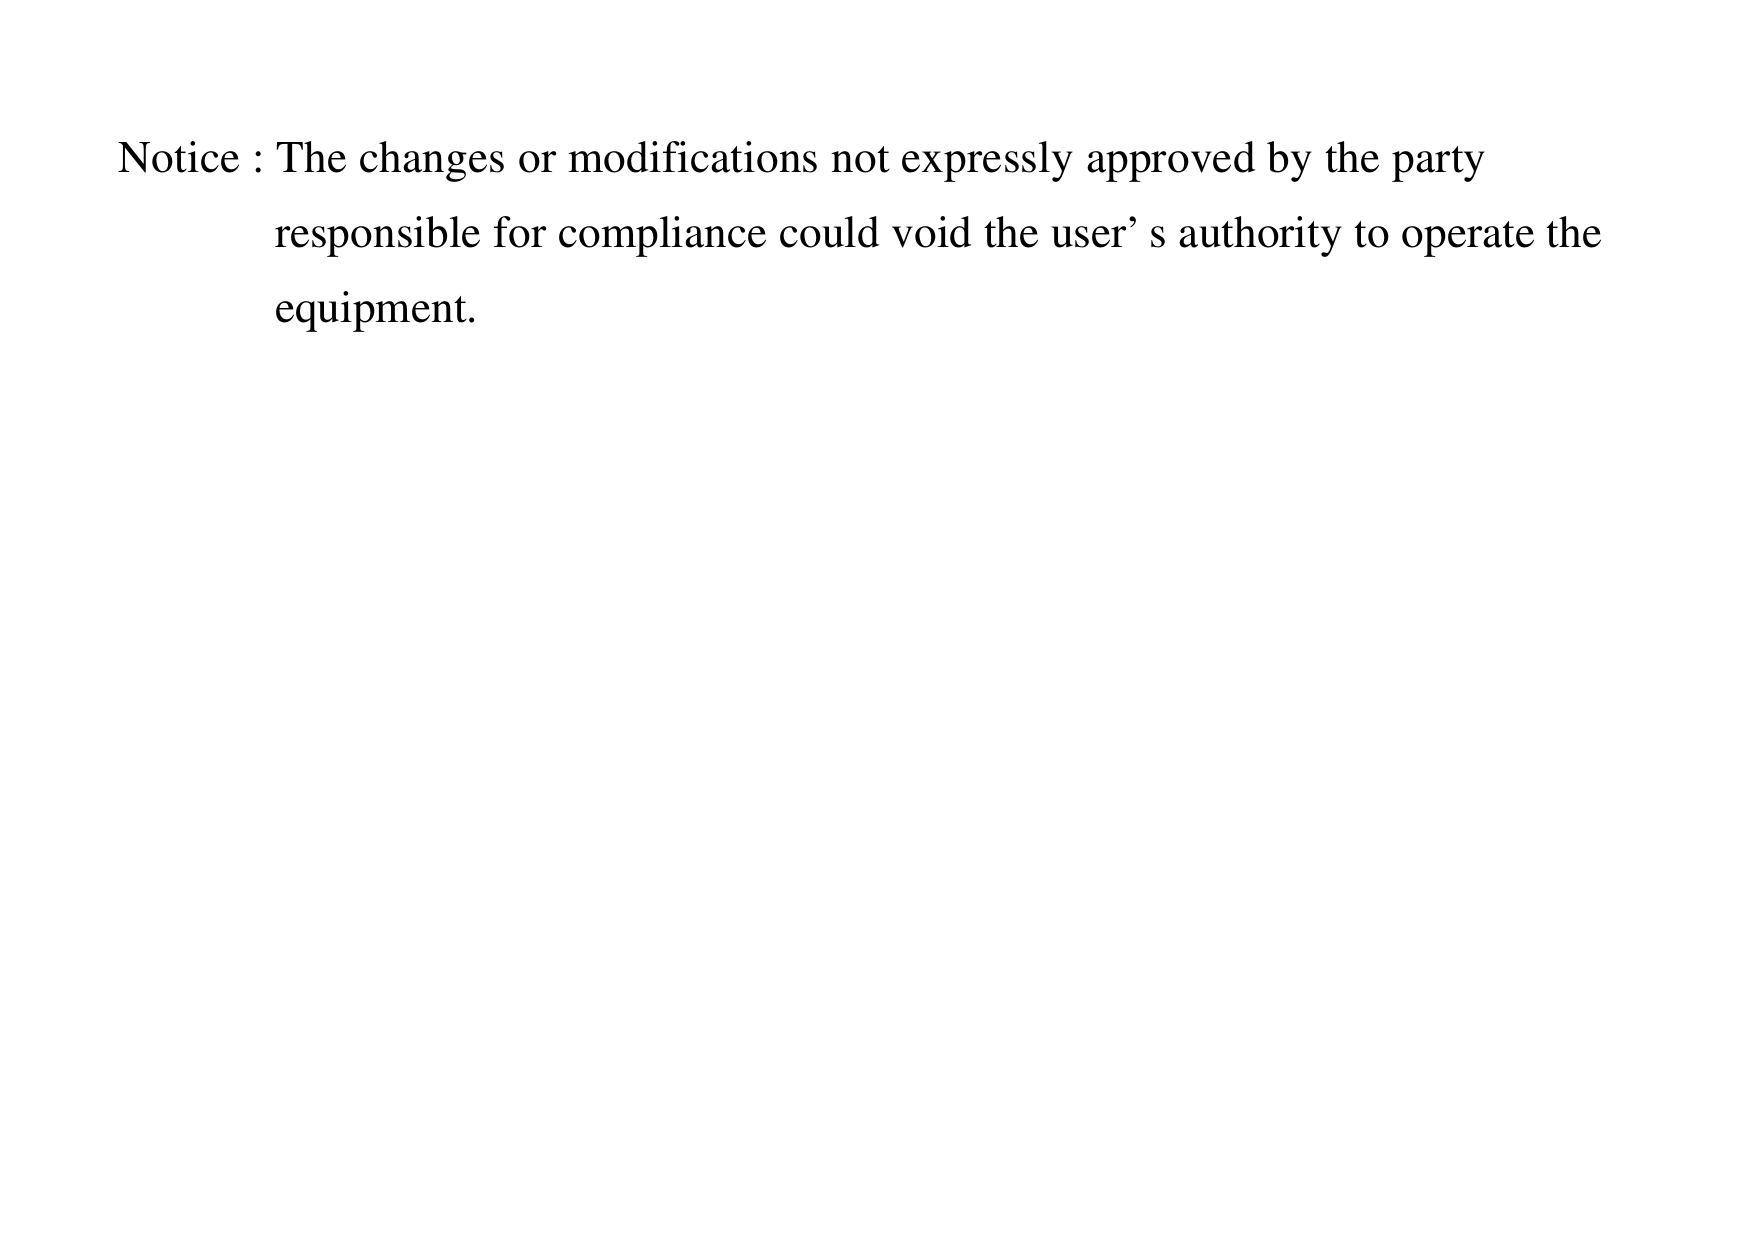 Notice : The changes or modifications not expressly approved by the party responsible for compliance could void the user’s authority to operate the equipment. 